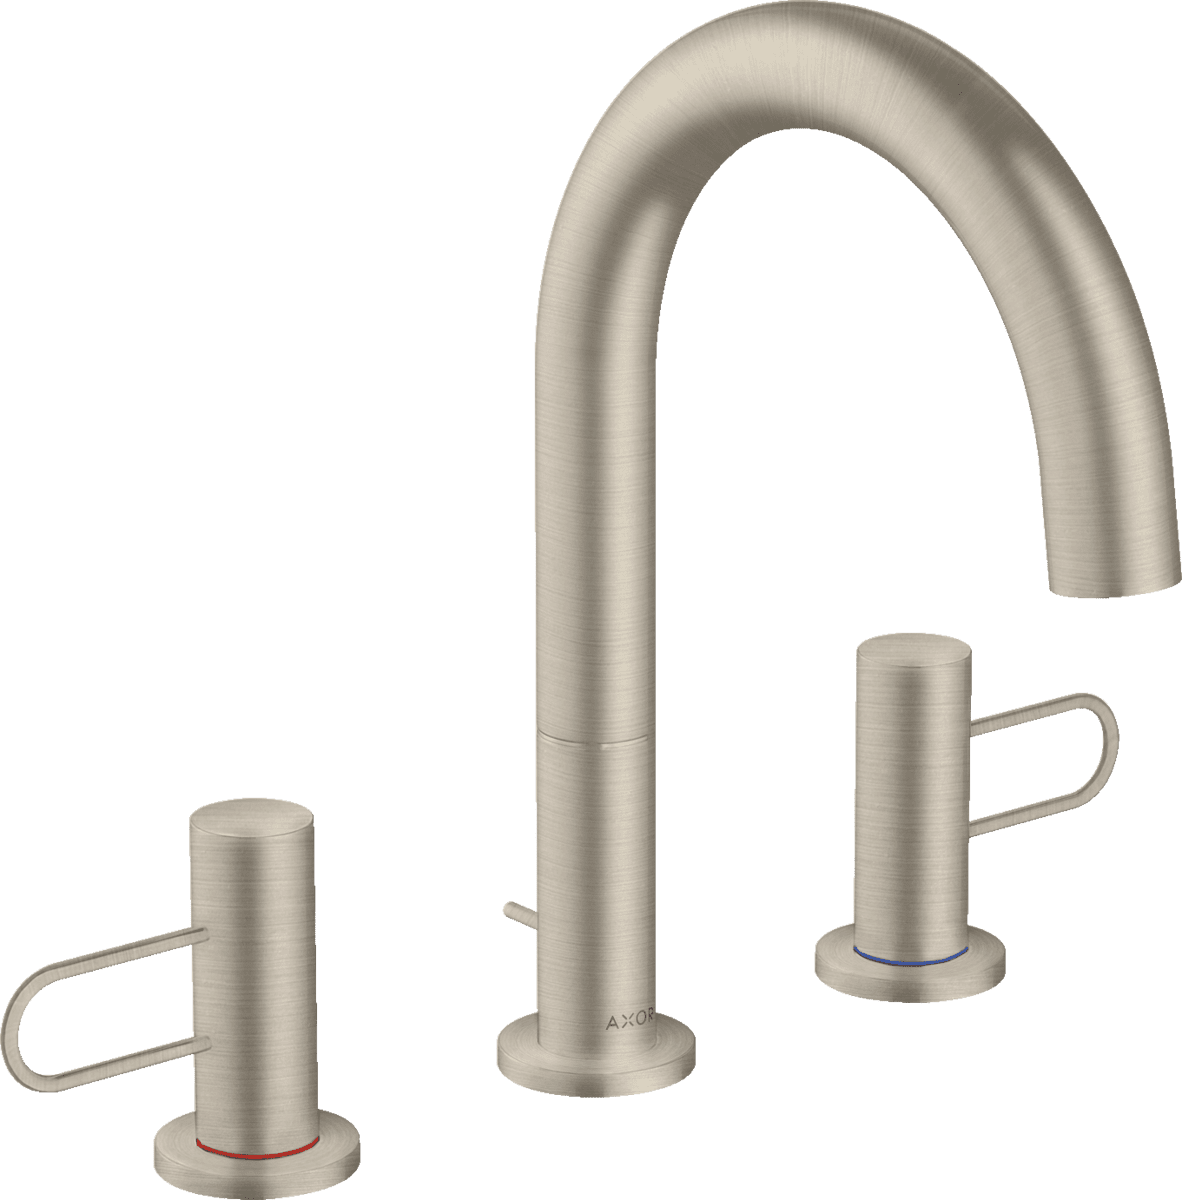 Picture of HANSGROHE AXOR Uno 3-hole basin mixer 160 with loop handles and pop-up waste set #38054820 - Brushed Nickel